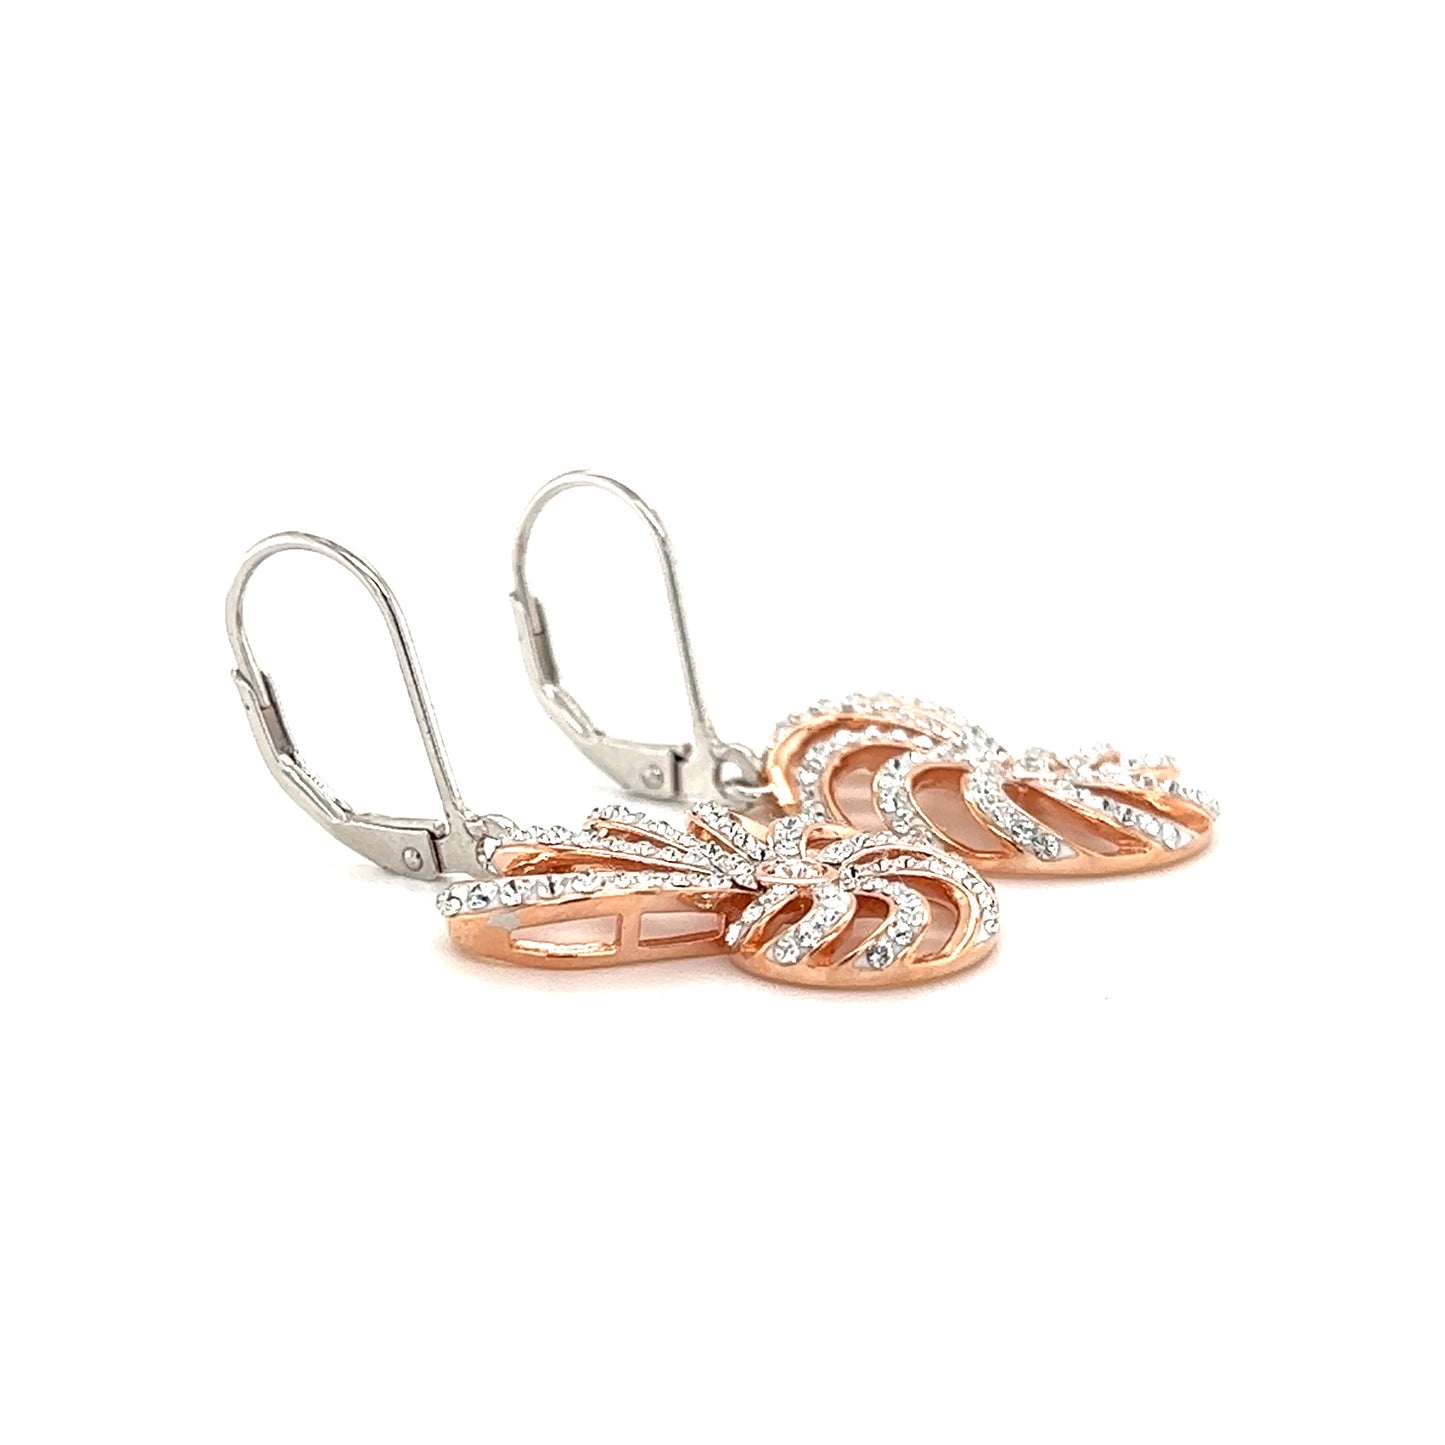 Nautilus Shell Dangle Earrings with Rose Gold Plate and White Crystals in Sterling Silver Flat Left Side View